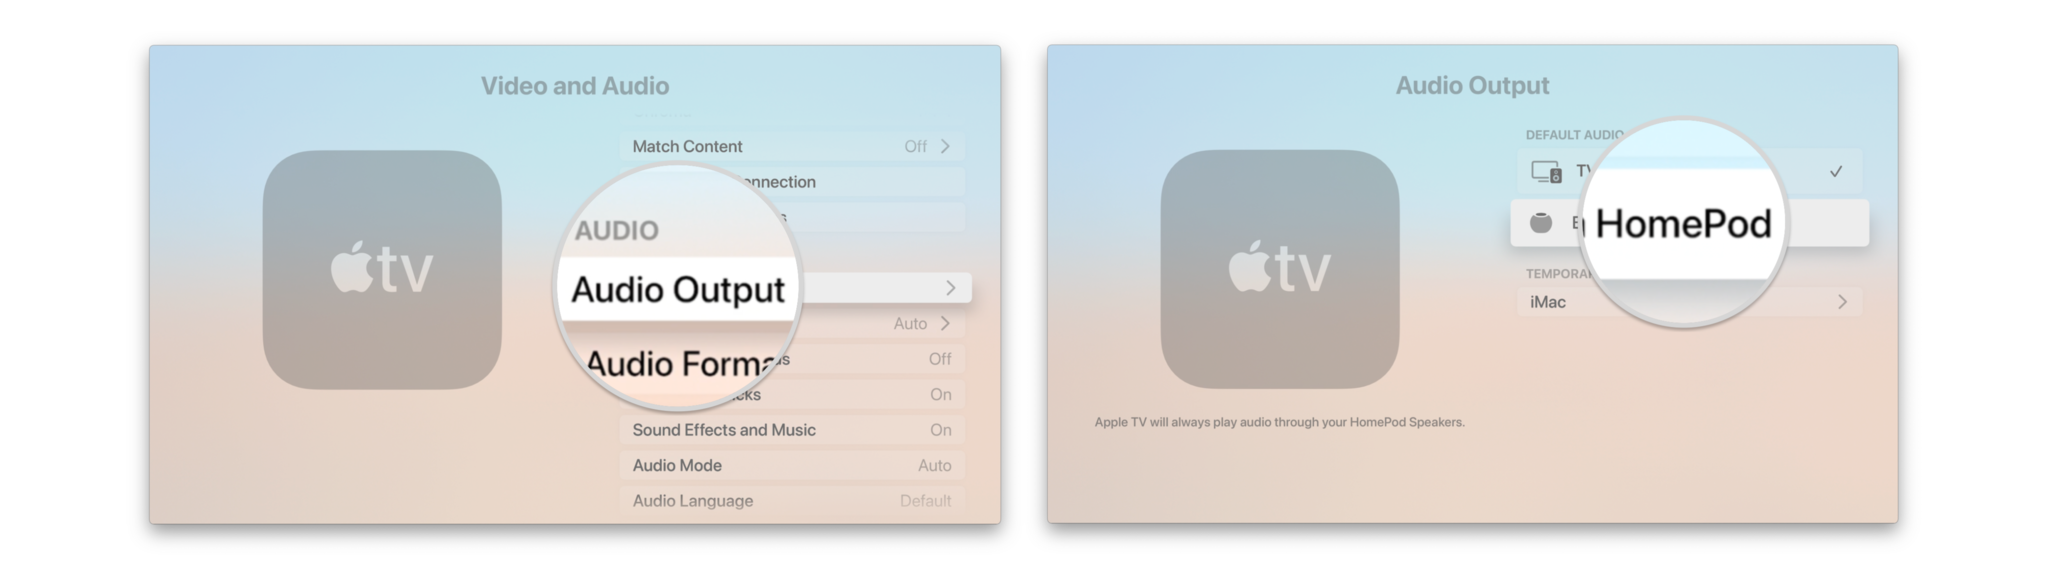 How to set your HomePod as your default speaker on Apple TV 4K by showing steps: Click Audio Output, Select your HomePod with a click